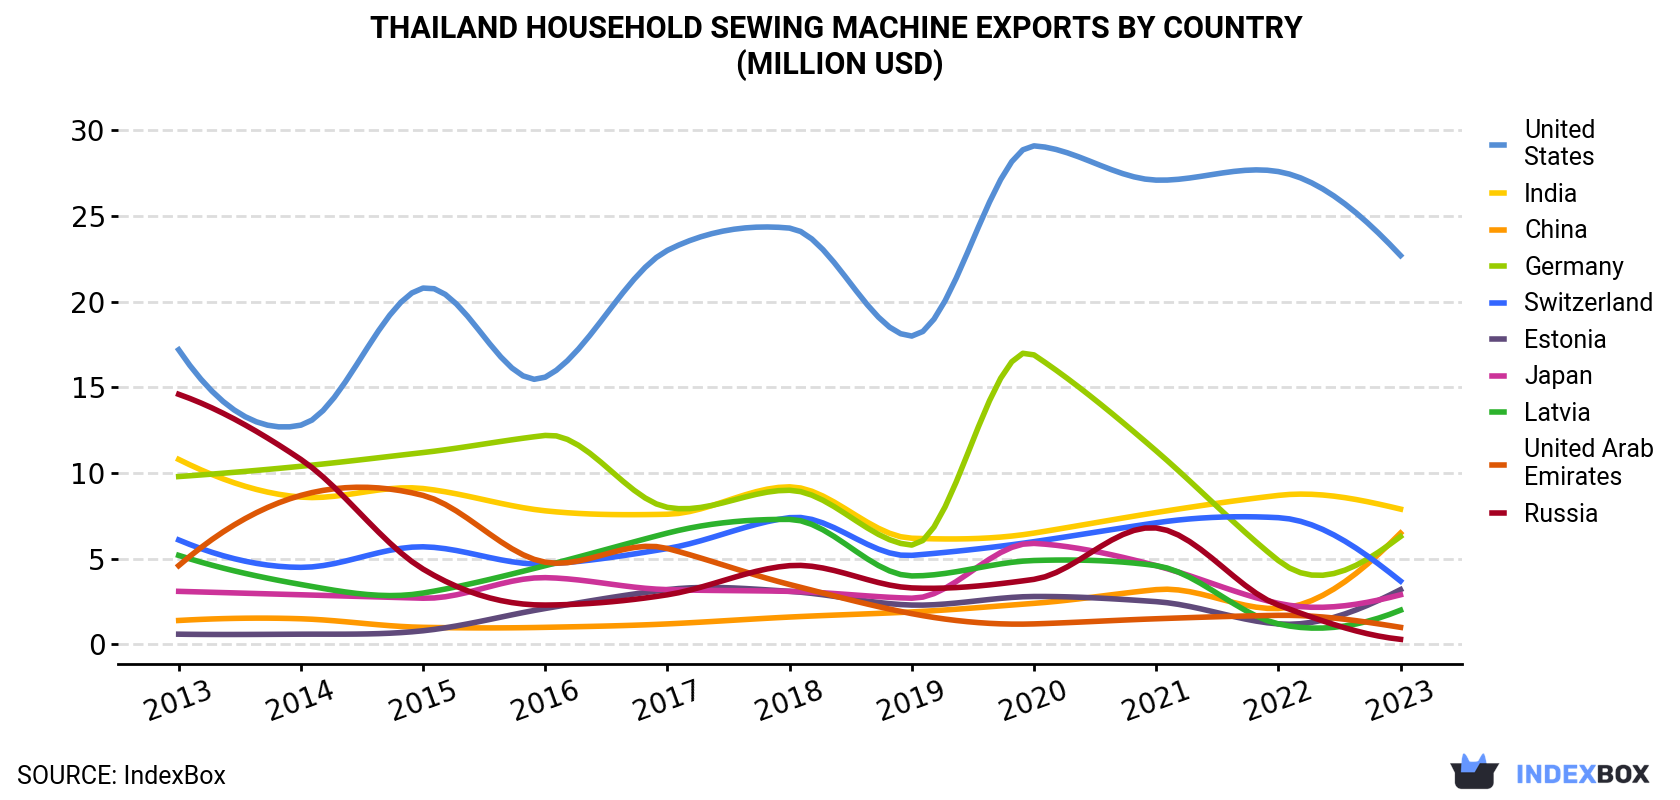 Thailand Household Sewing Machine Exports By Country (Million USD)